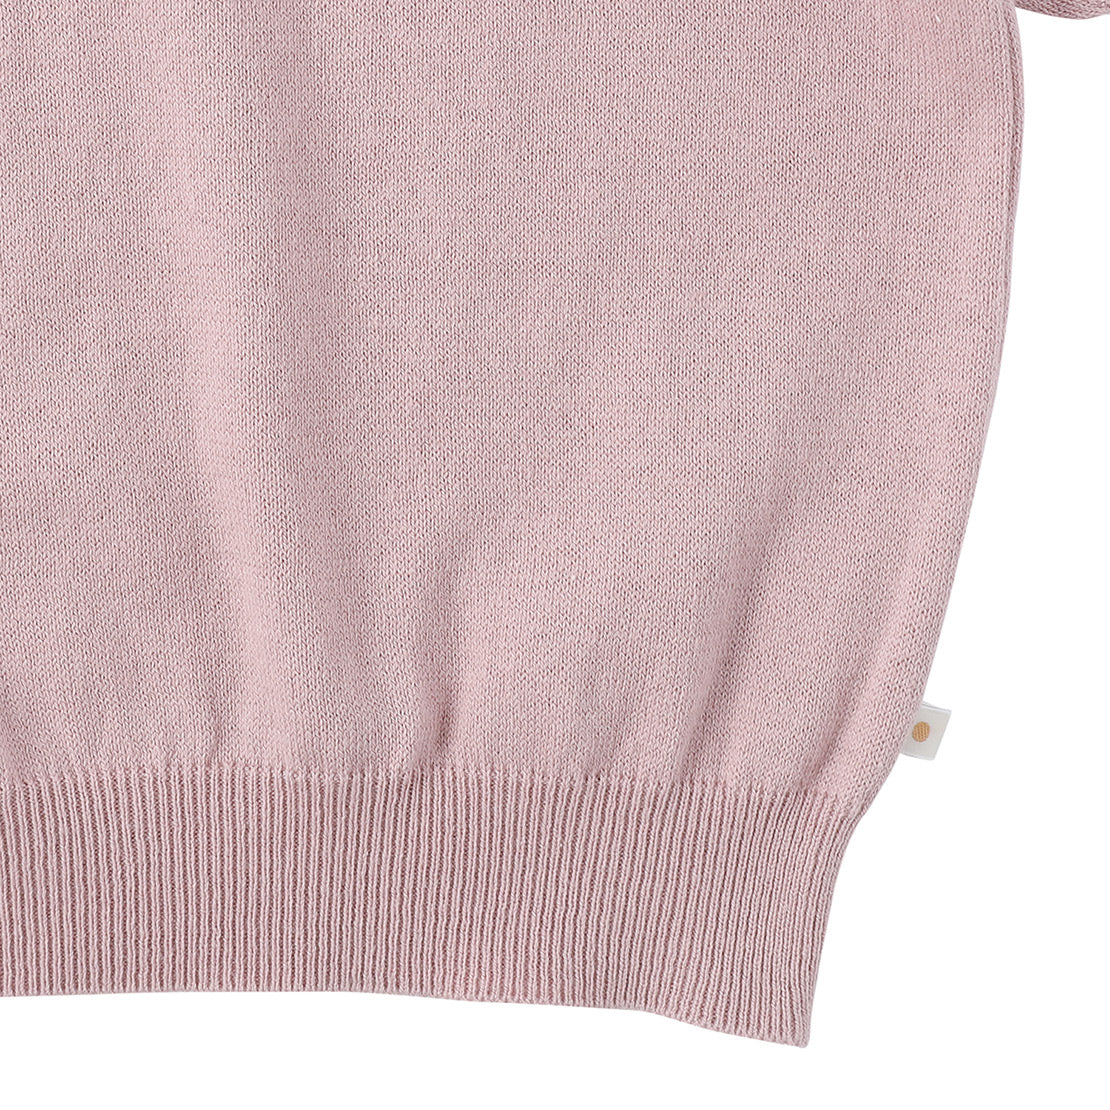 Cotton Curly Knit T-Shirt Pink